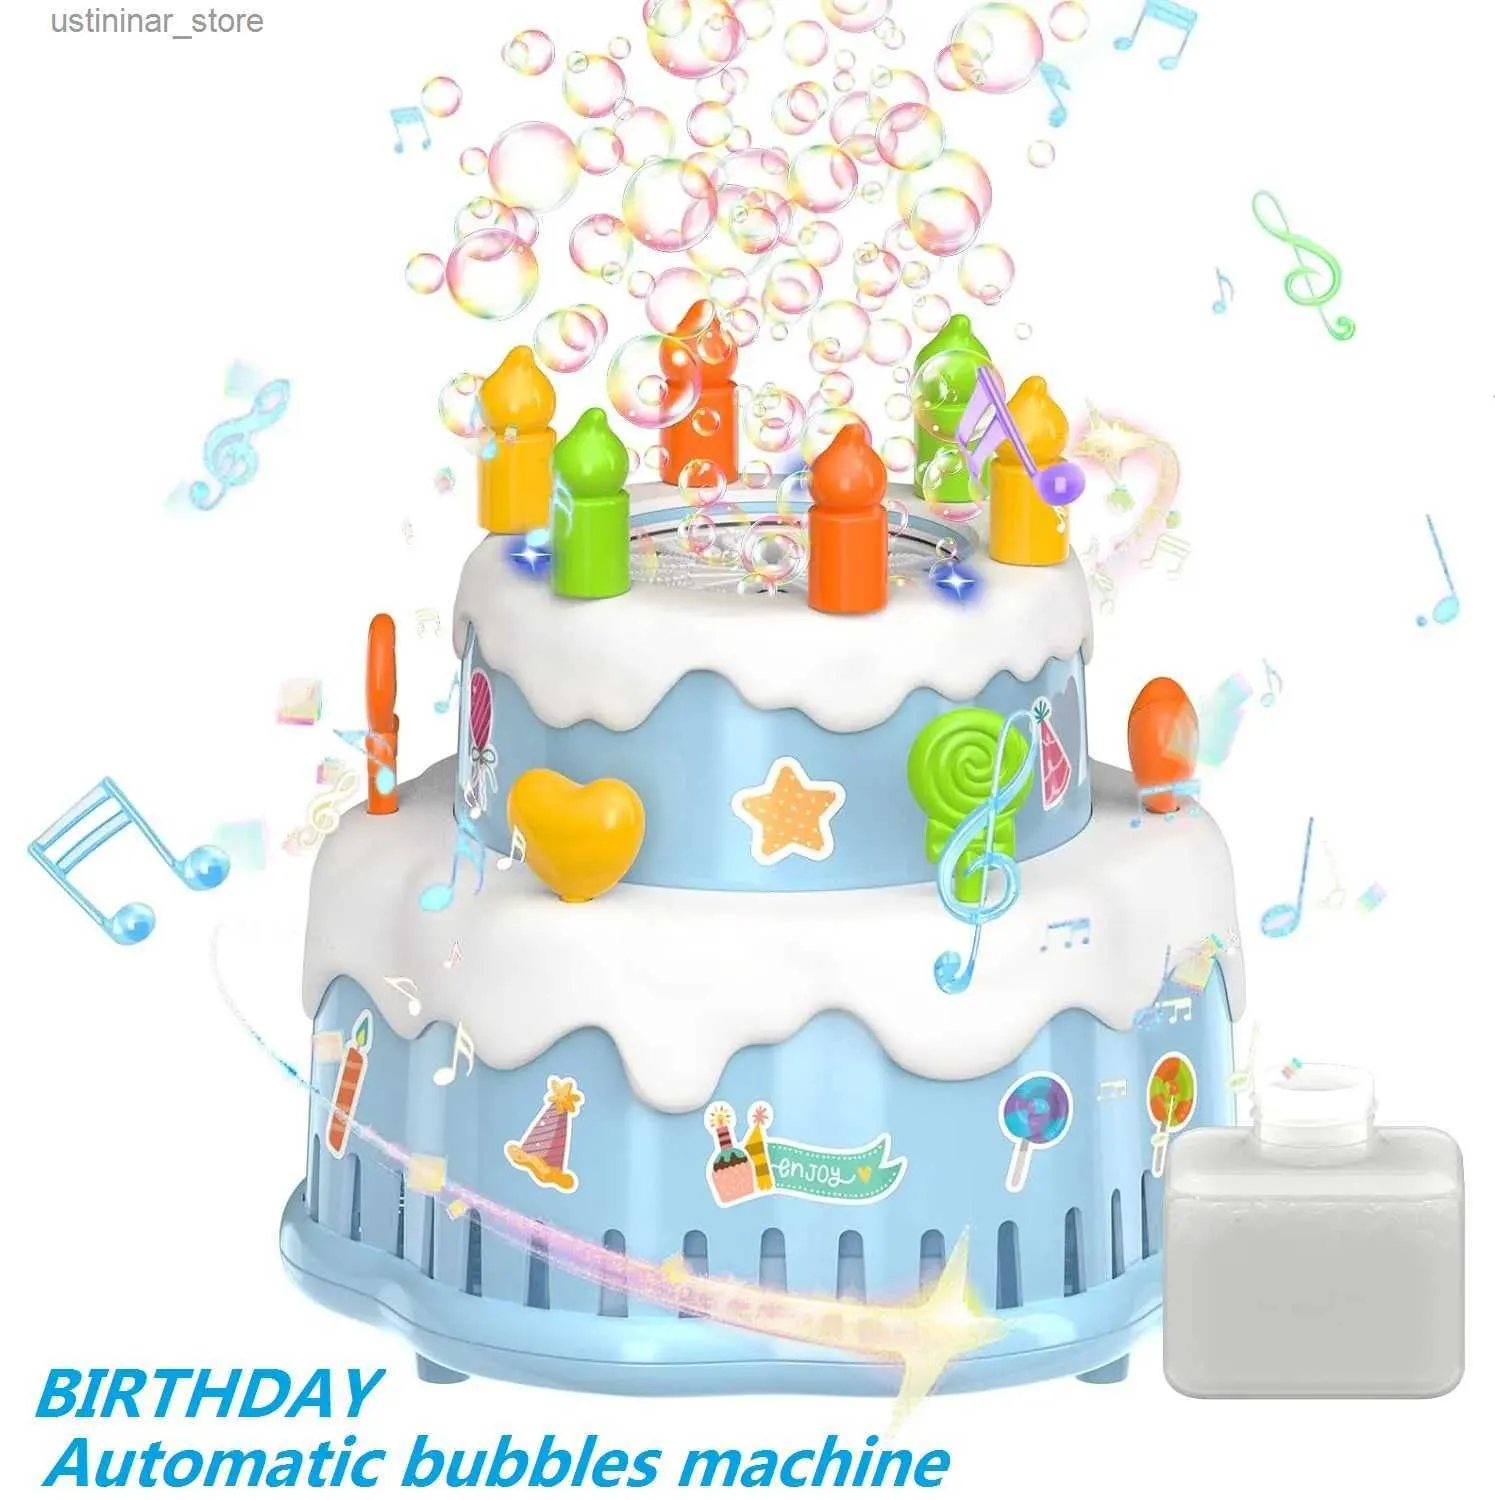 Sand Play Water Fun Birthday Cake Bubble Machine for Kids Automatic 10000+ Bubbles Per Minute/Lights/Music S Toys for r Boys Girls Birthday Parties L47